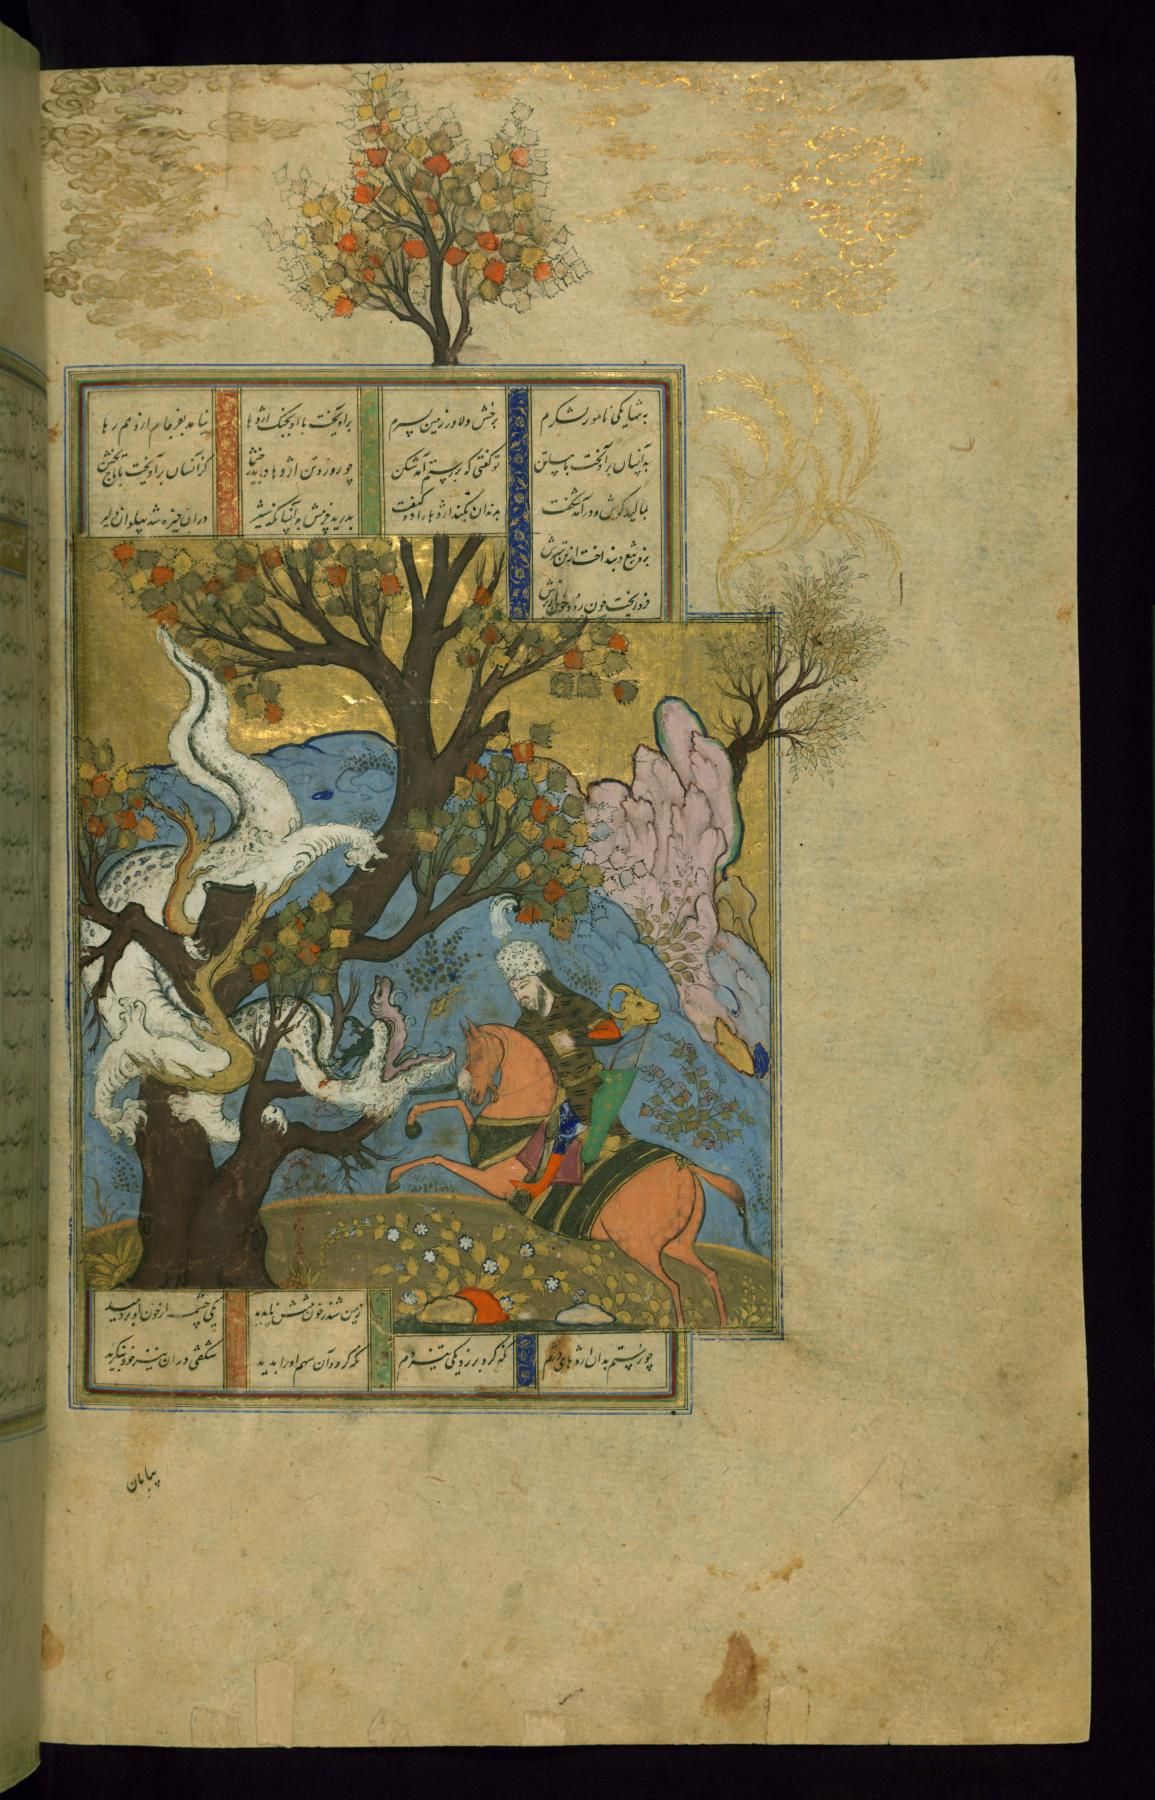 Gaming at the Museum – Building a Setting from the Shahnameh